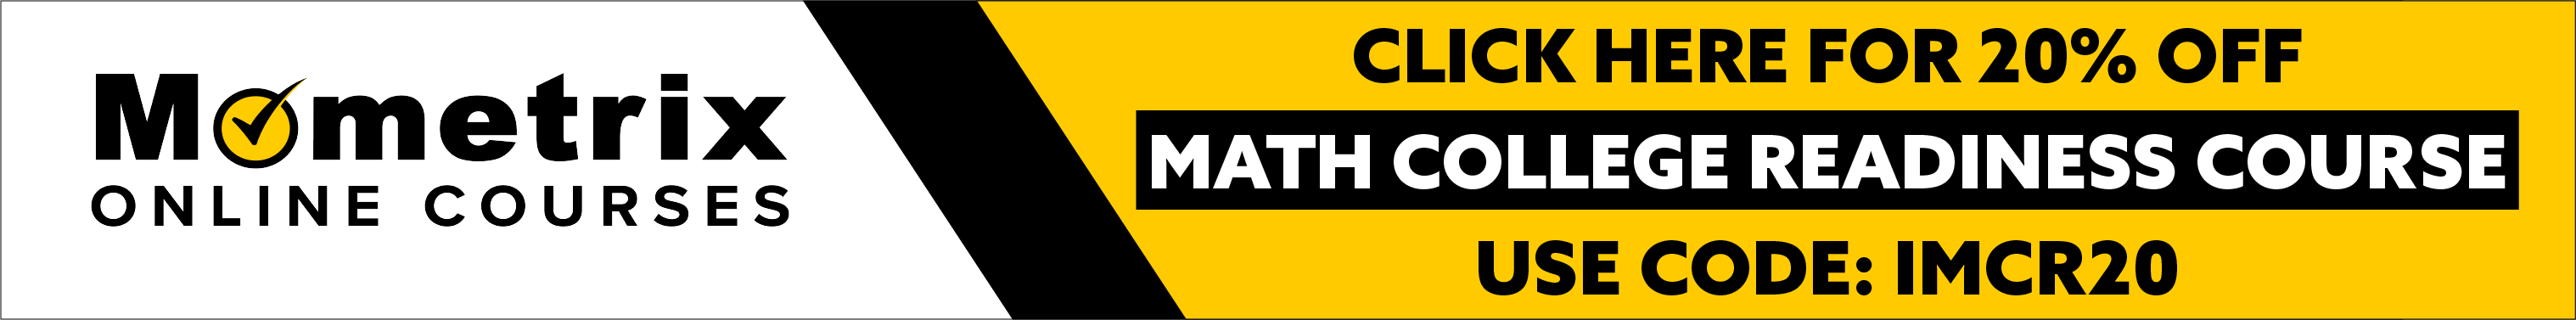 Click here for 20% off of Mometrix Math College Readiness Online Course. Use code: IMCR20